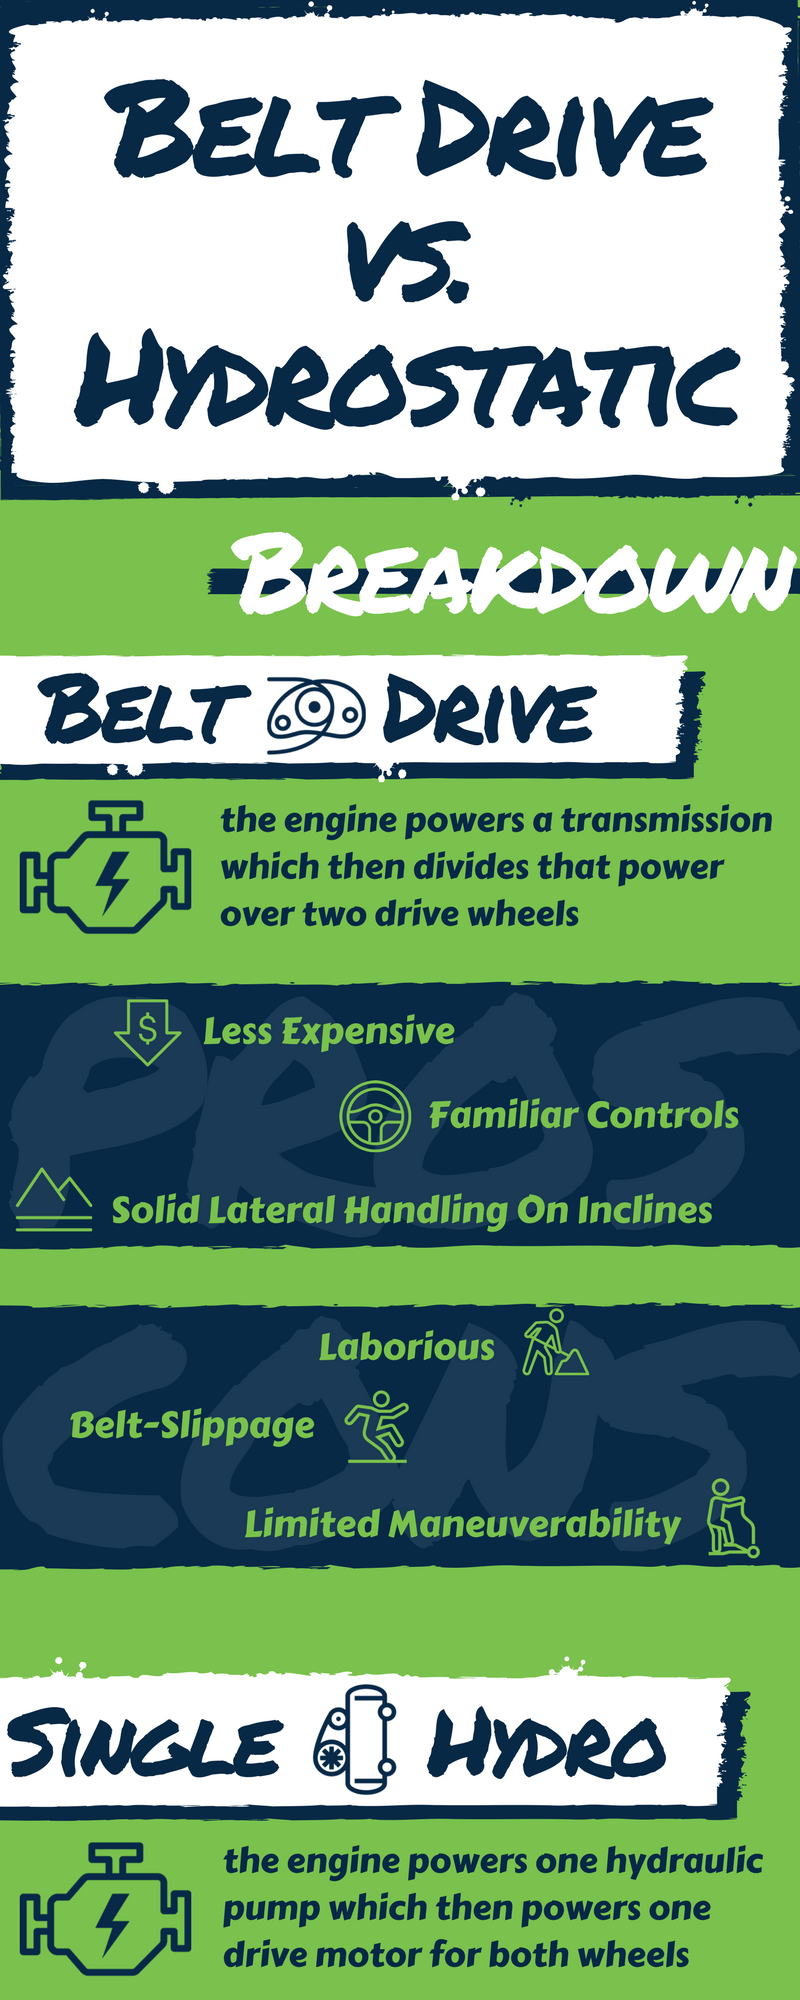 [Infographic] Commercial Lawn Mowers: Belt Drive vs. Hydrostatic